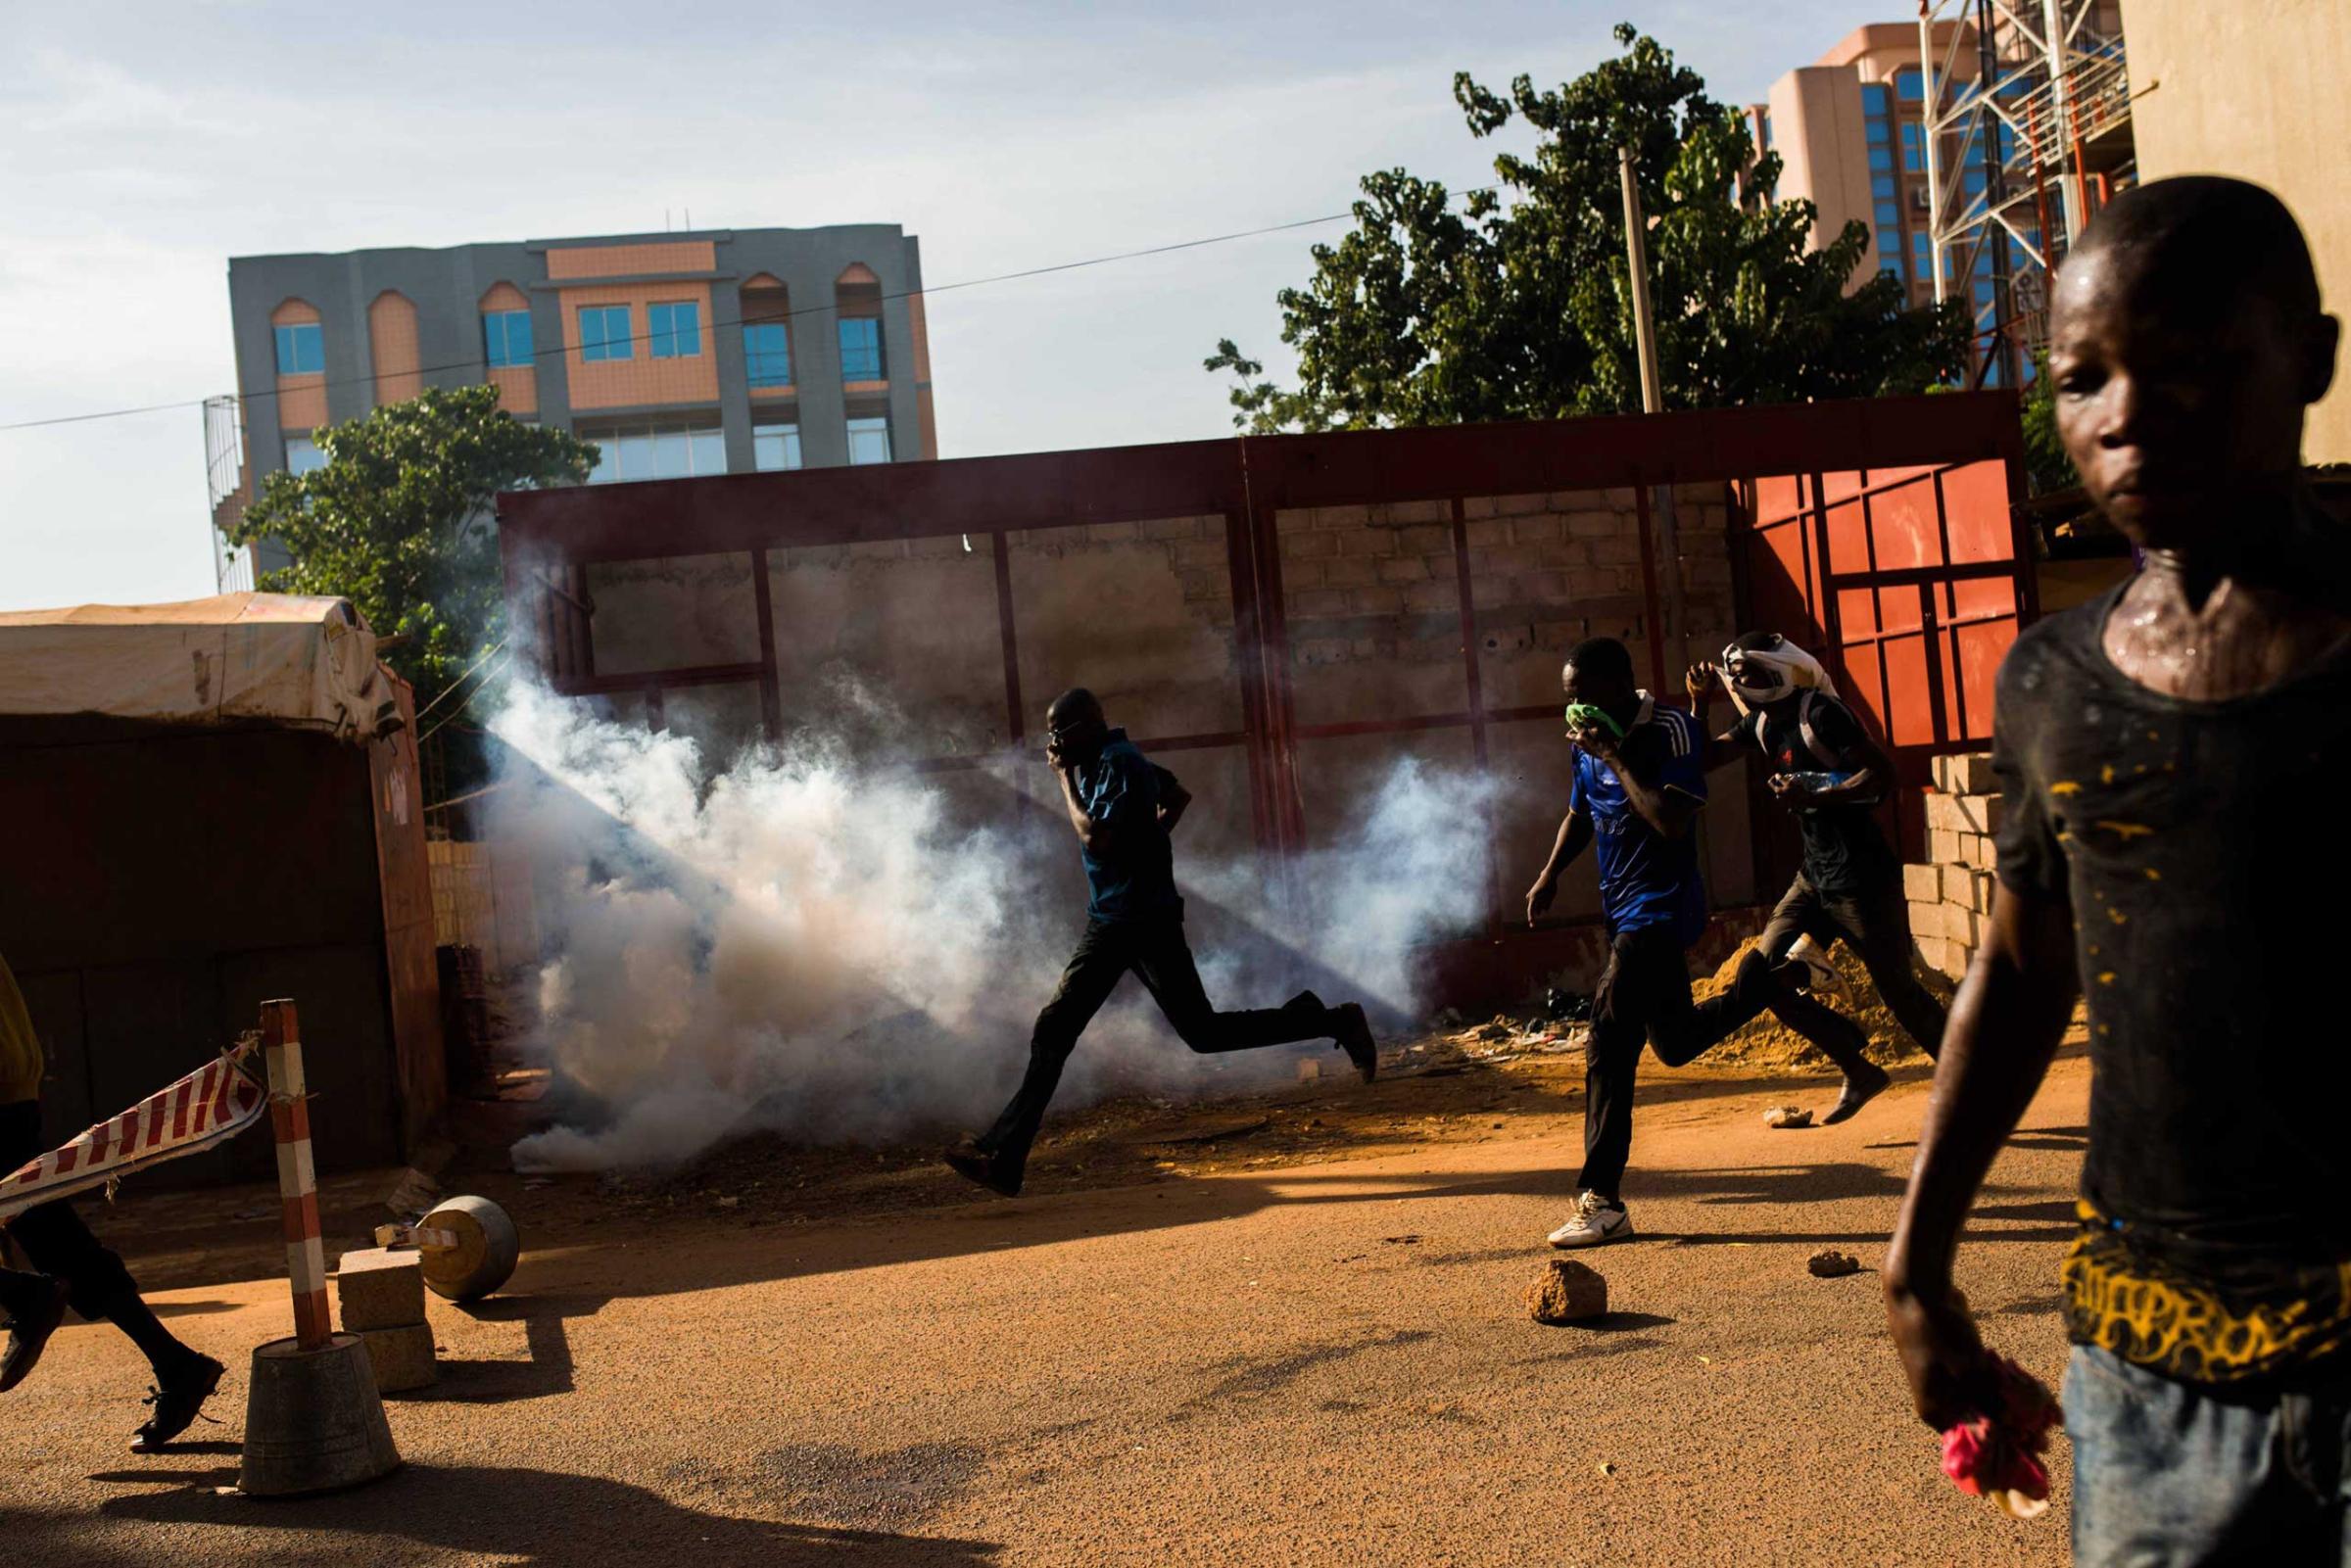 Protestors on the rampage near the parliament building in Burkina Faso as people protest against their longtime president Blaise Compaore who seeks another term in Ouagadougou, Burkina Faso, Oct. 30, 2014.